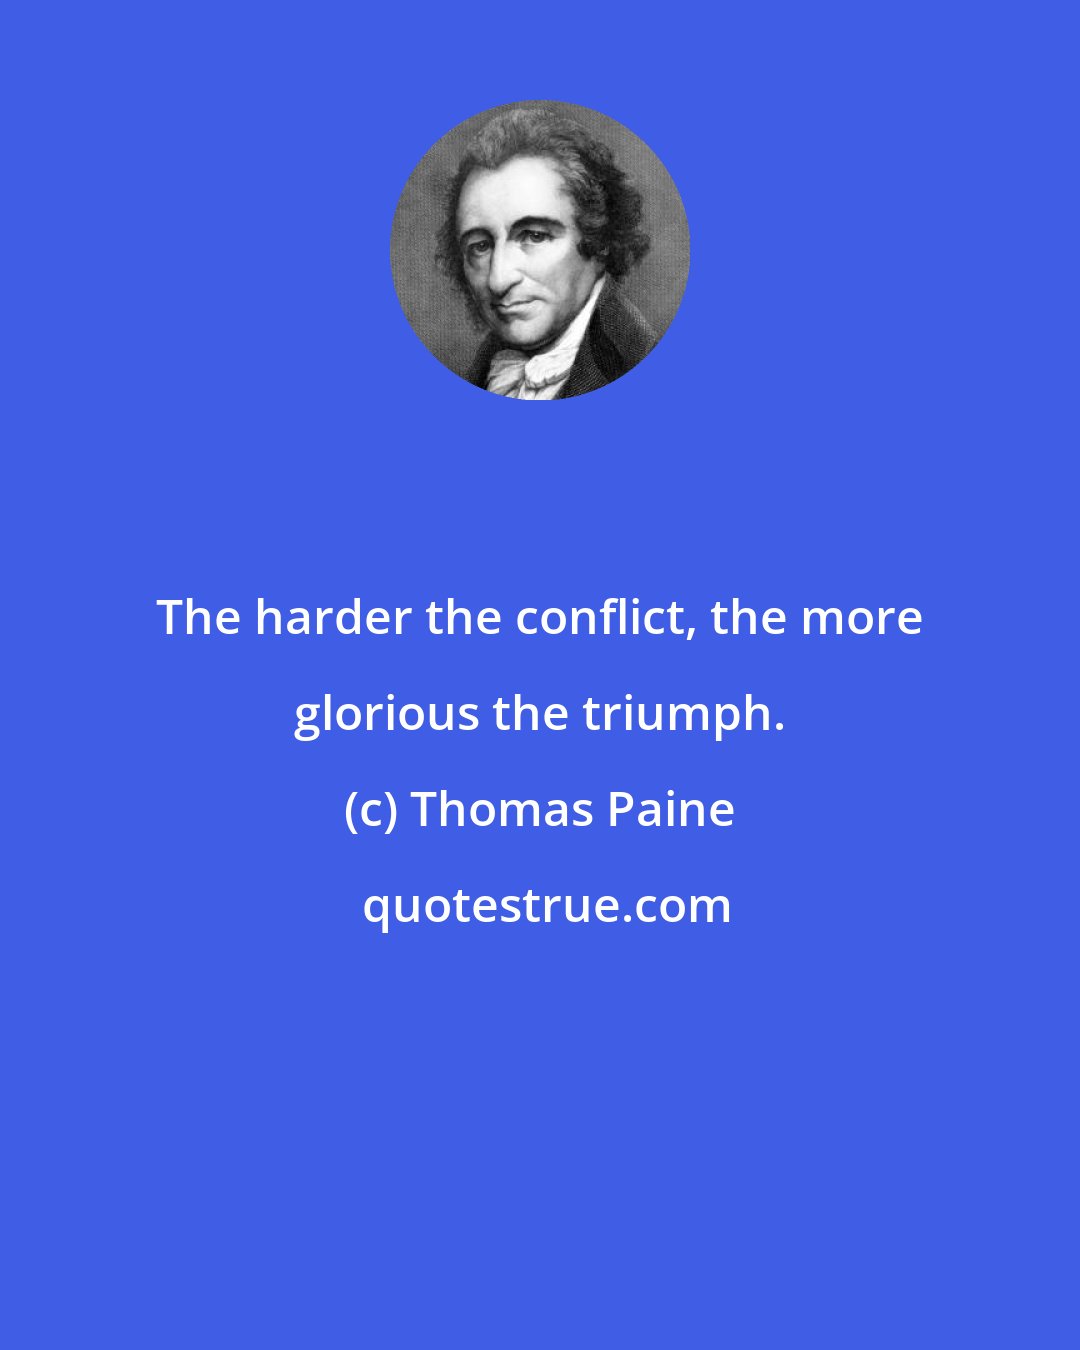 Thomas Paine: The harder the conflict, the more glorious the triumph.